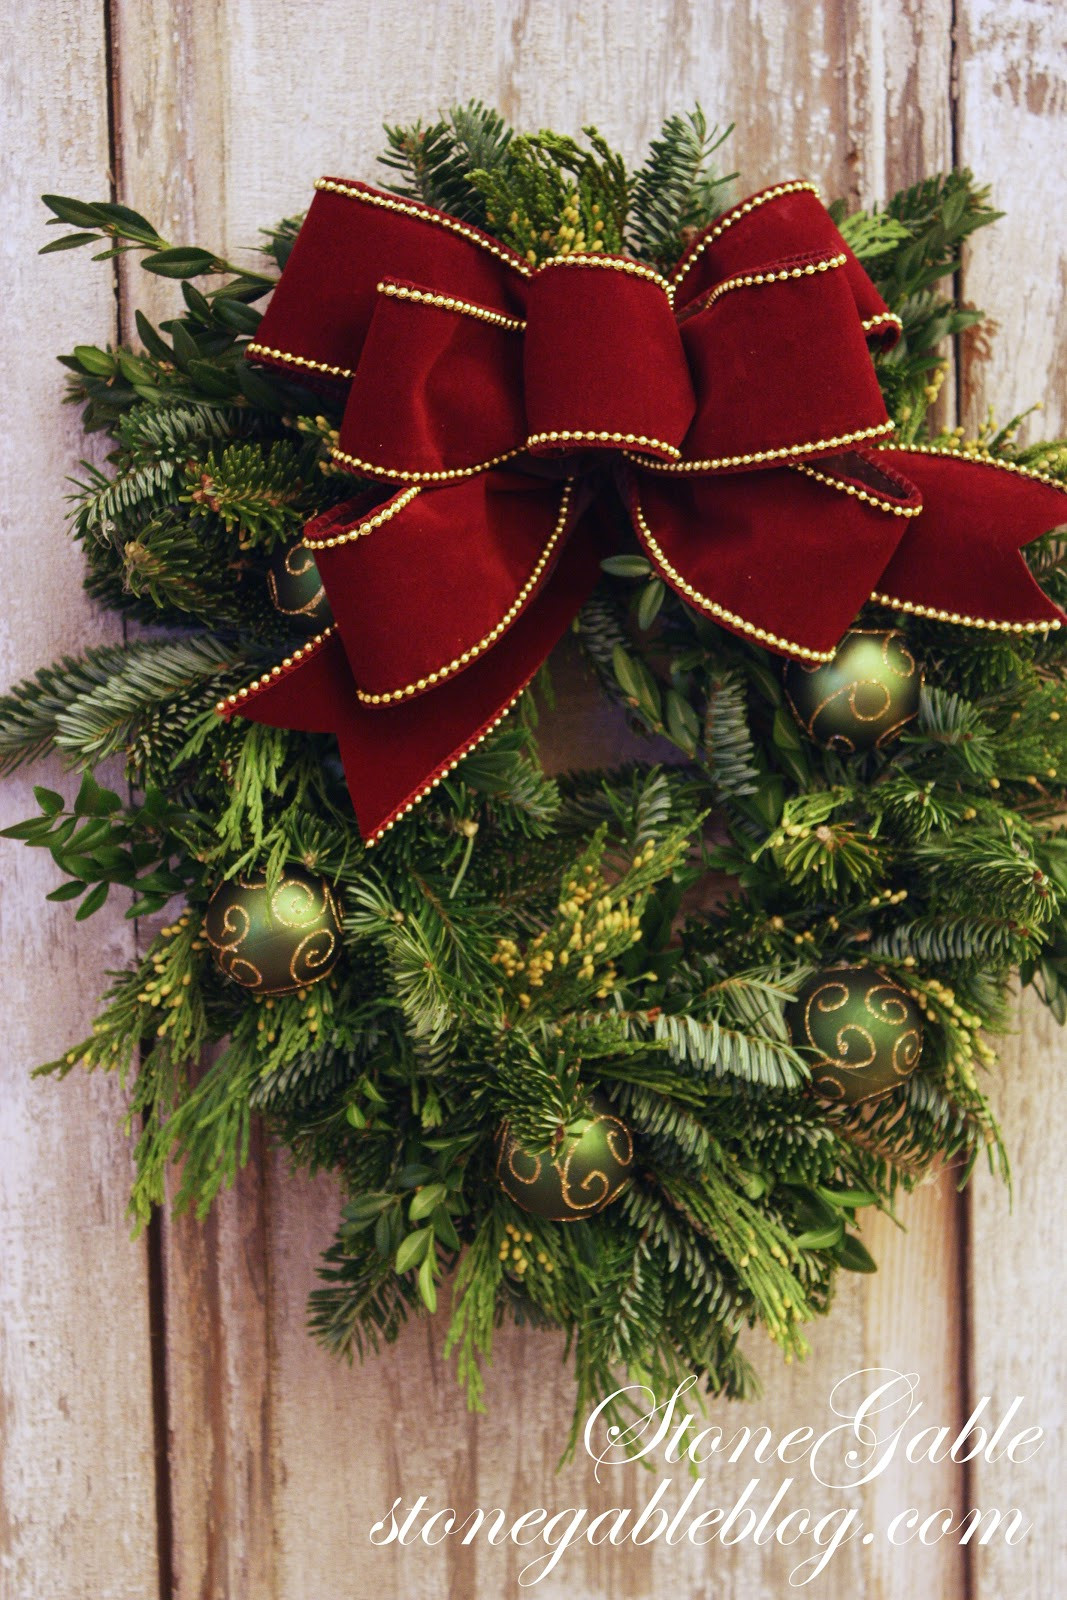 DIY Christmas Bows
 THE EASIEST WAY TO MAKE A LIVE WREATH StoneGable